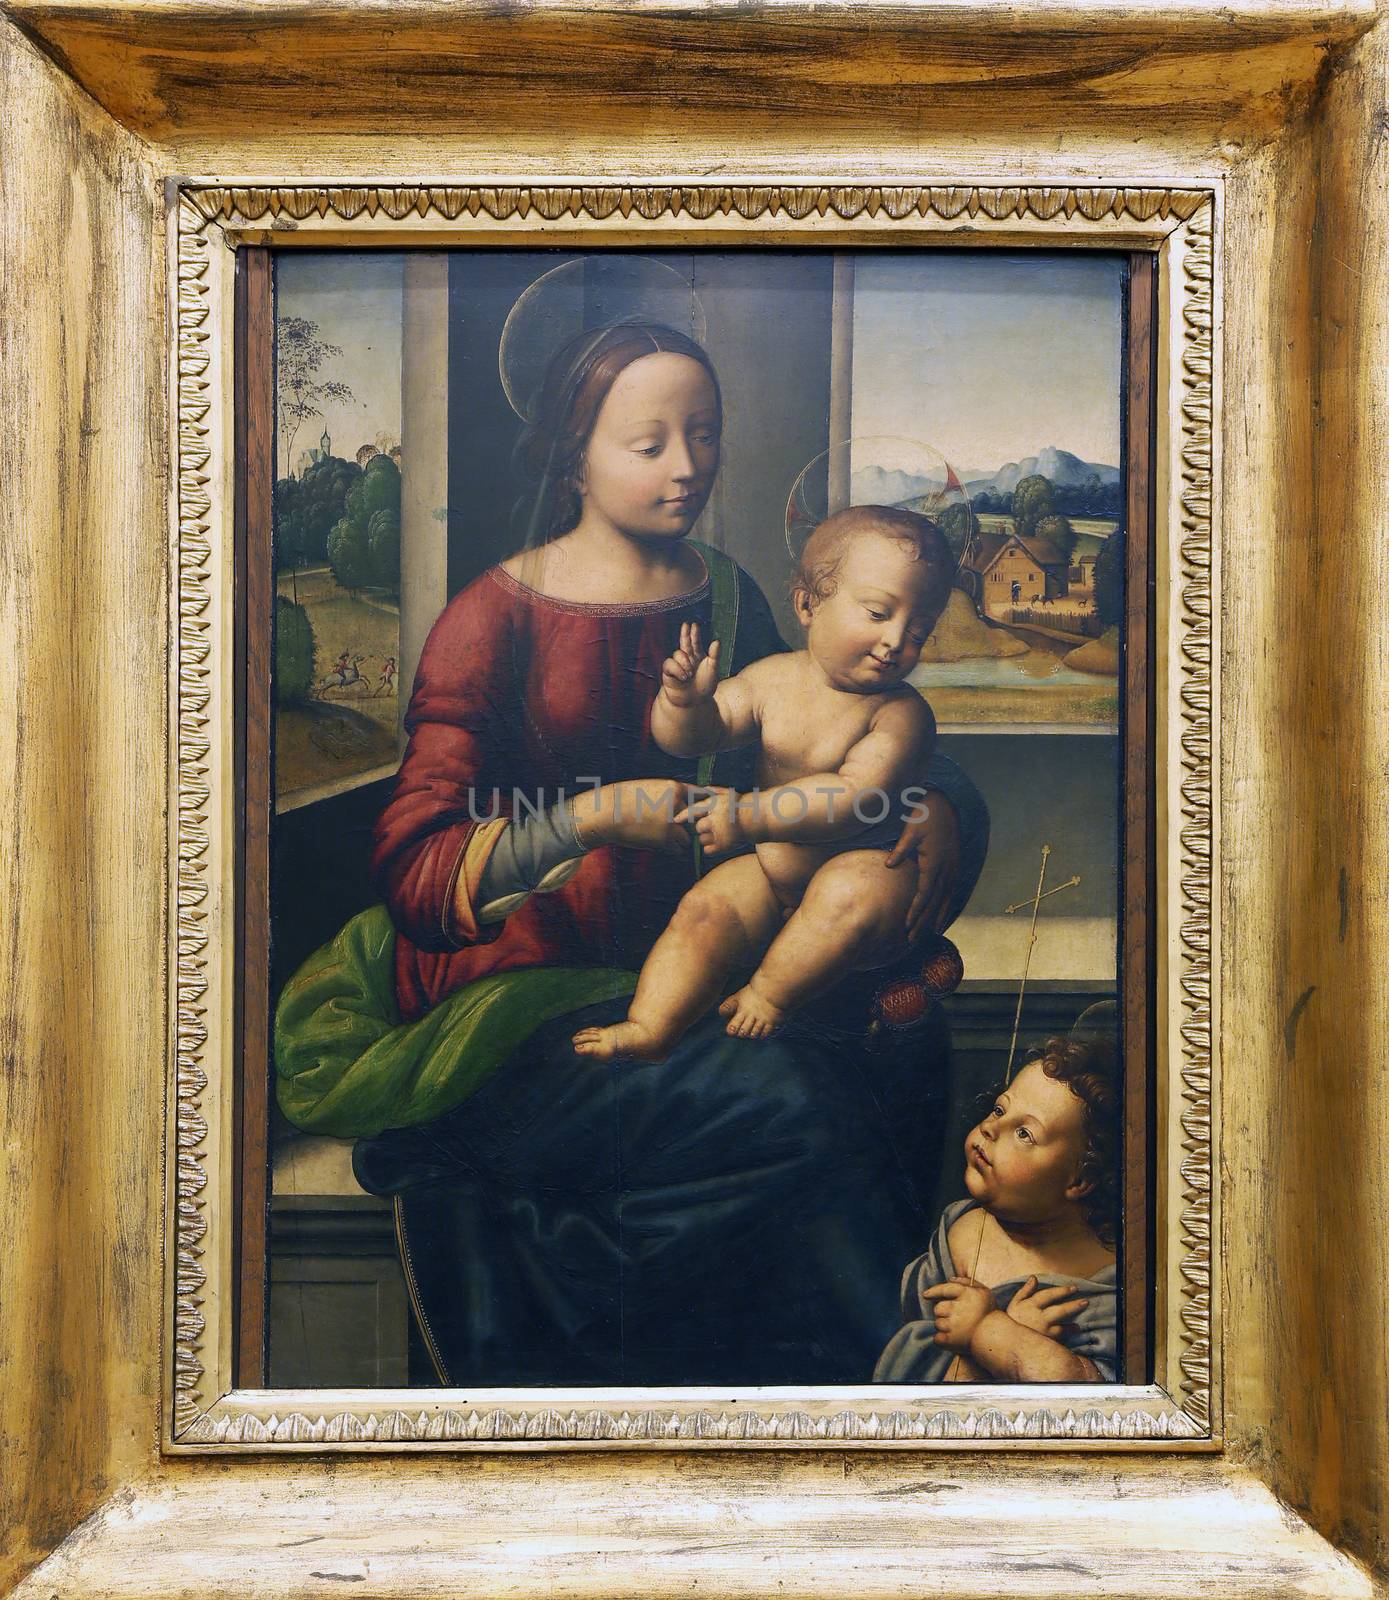 According to Fra Bartolommeo: Madonna and Child with St. John, Old Masters Collection, Croatian Academy of Sciences in Zagreb, Croatia